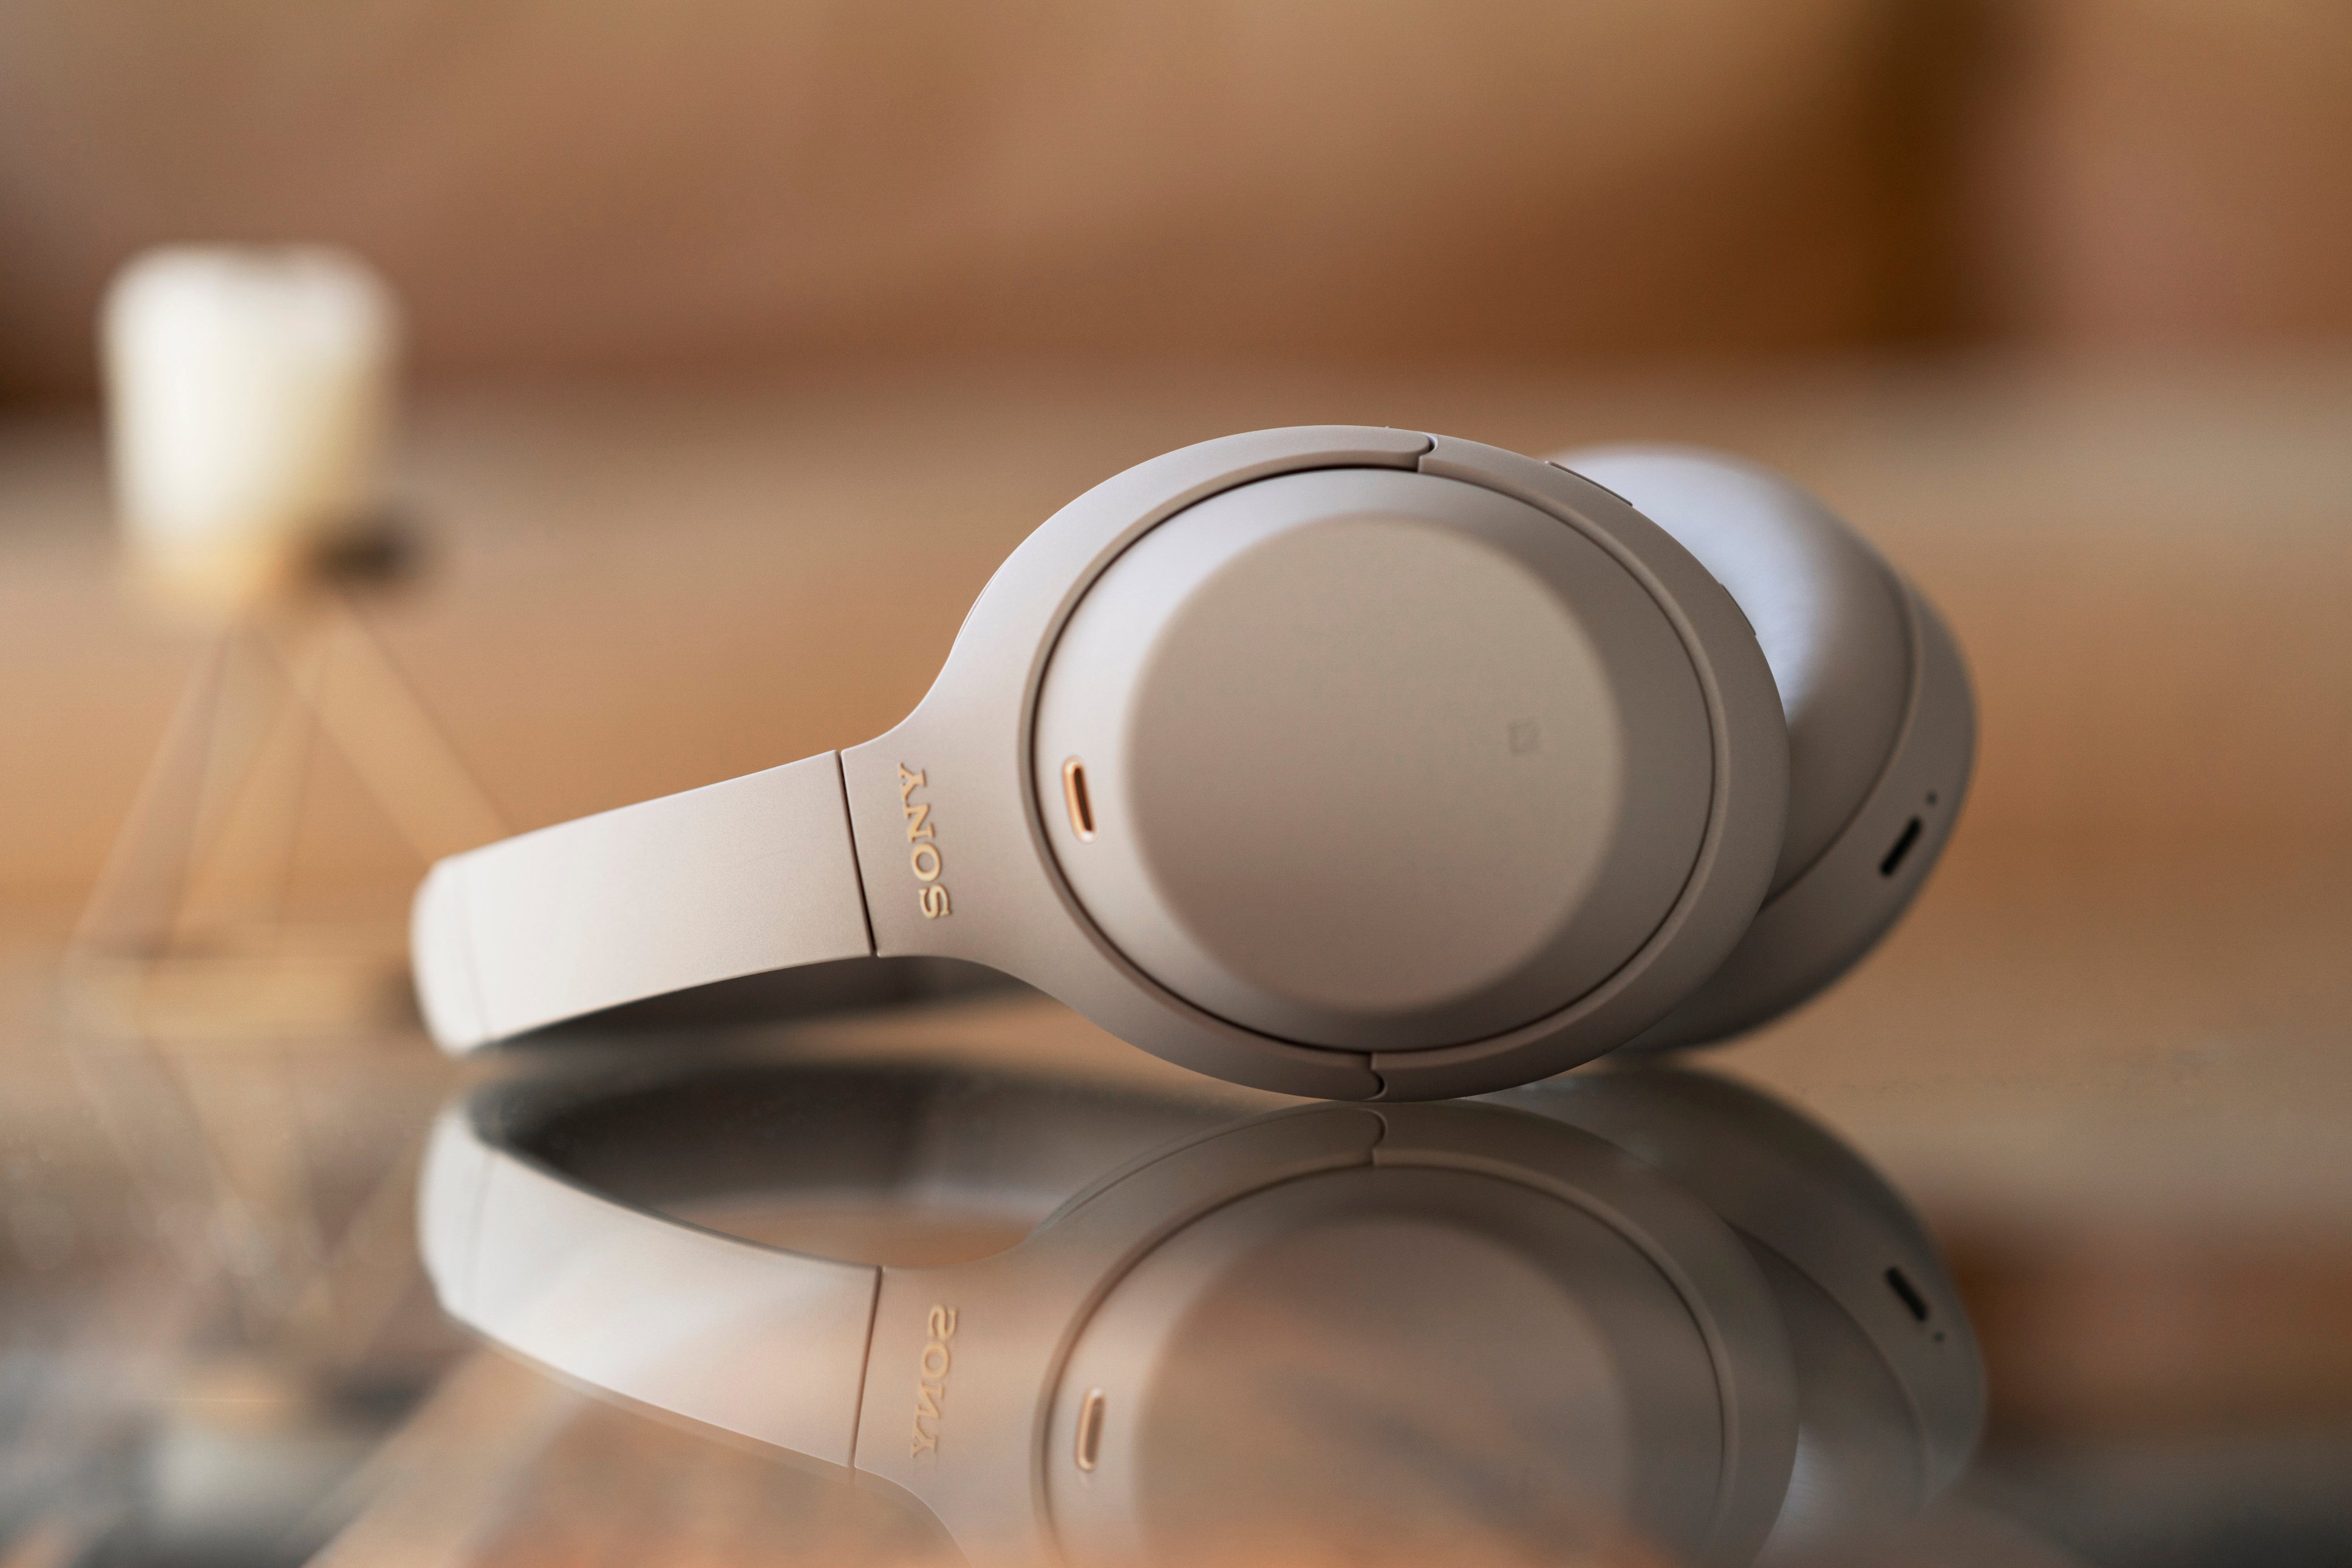 Rent Sony WH-1000 XM4 Noise-cancelling Over-ear Bluetooth Headphones from  €12.90 per month